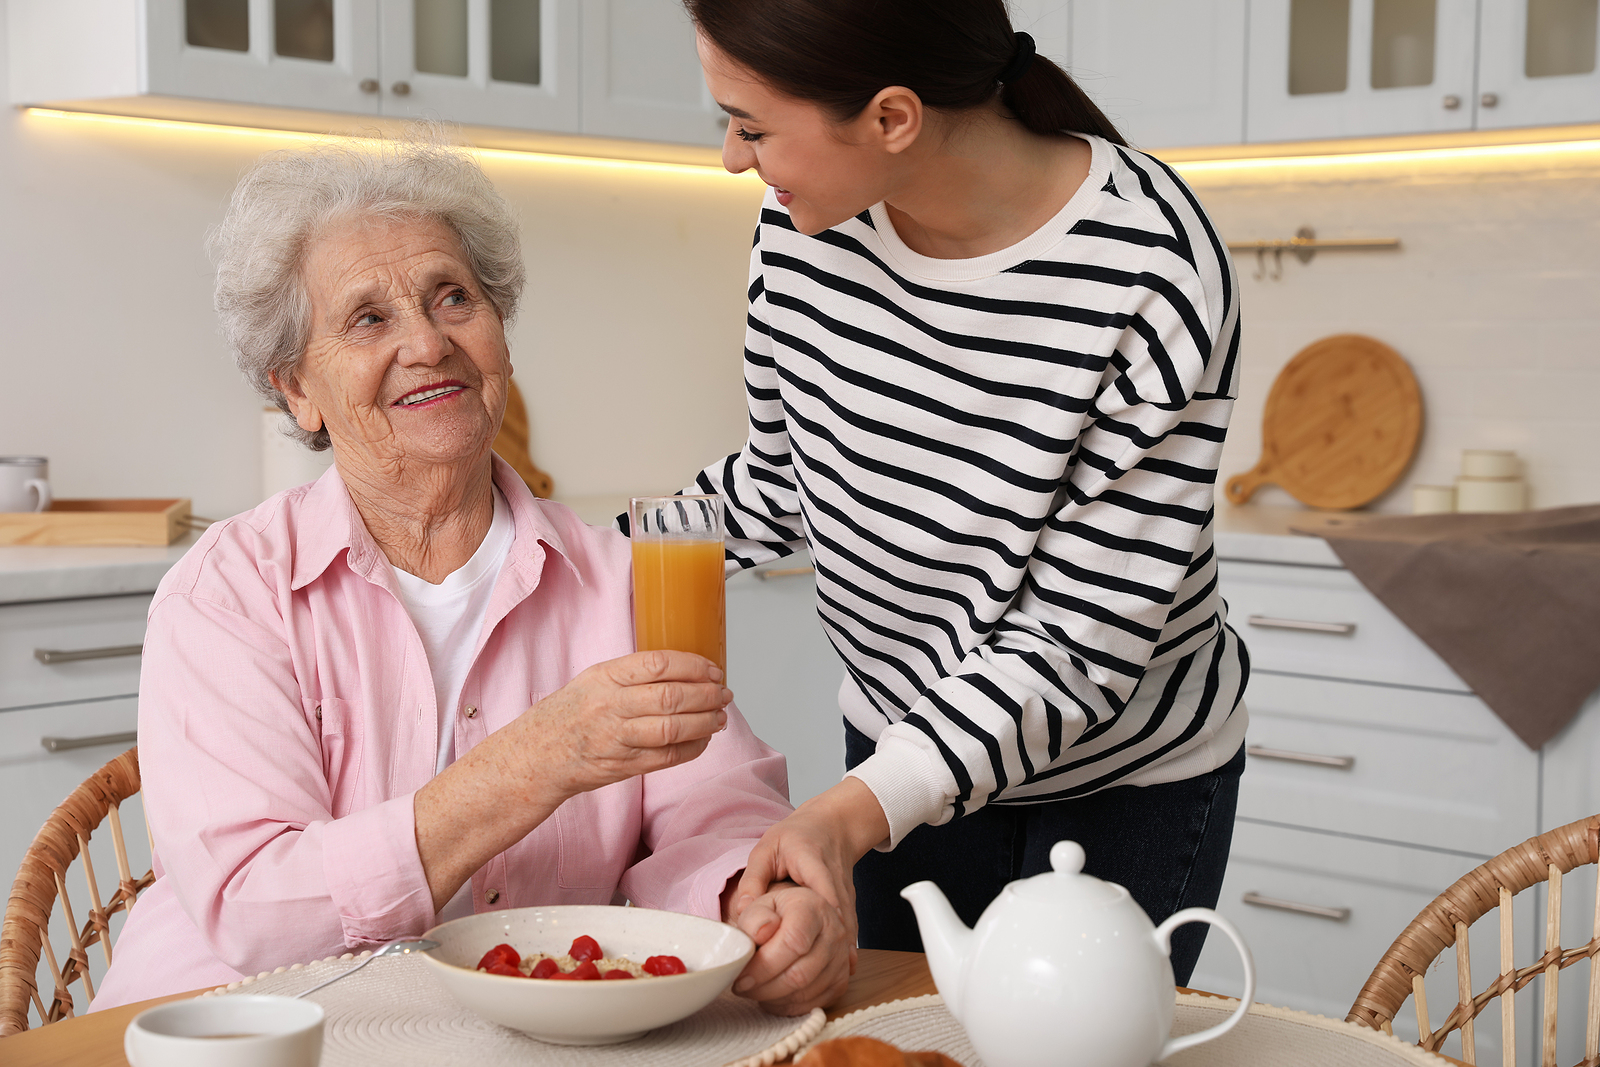 Six Ways Home Care Helps With Meals